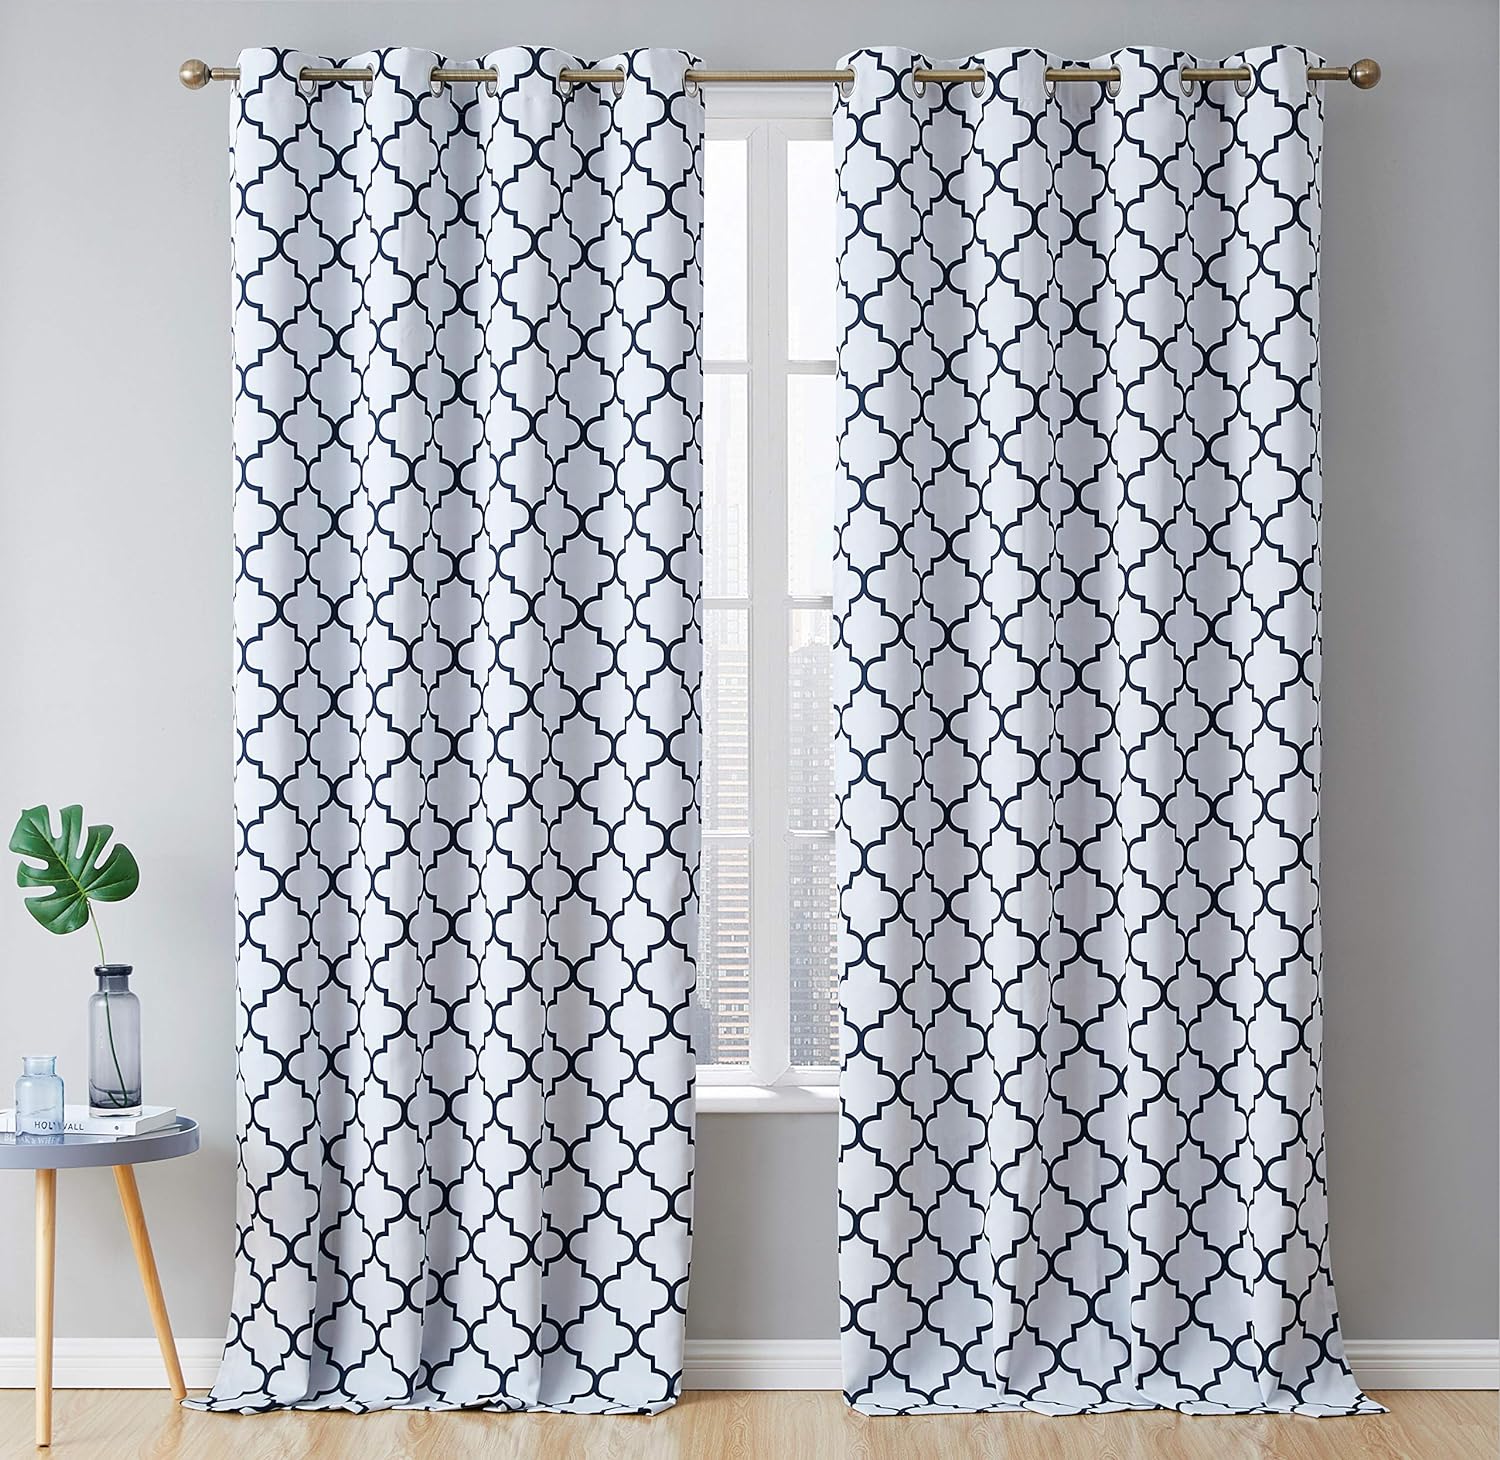 HLC.ME Lattice Print Design Blackout Curtains 72 Long - Thermal Insulated Soundproof Darkening Grommet Window Treatments Set Draperies for Bedroom - 2 Panels - 37 W x 72 L - Platinum White  Navy Blue